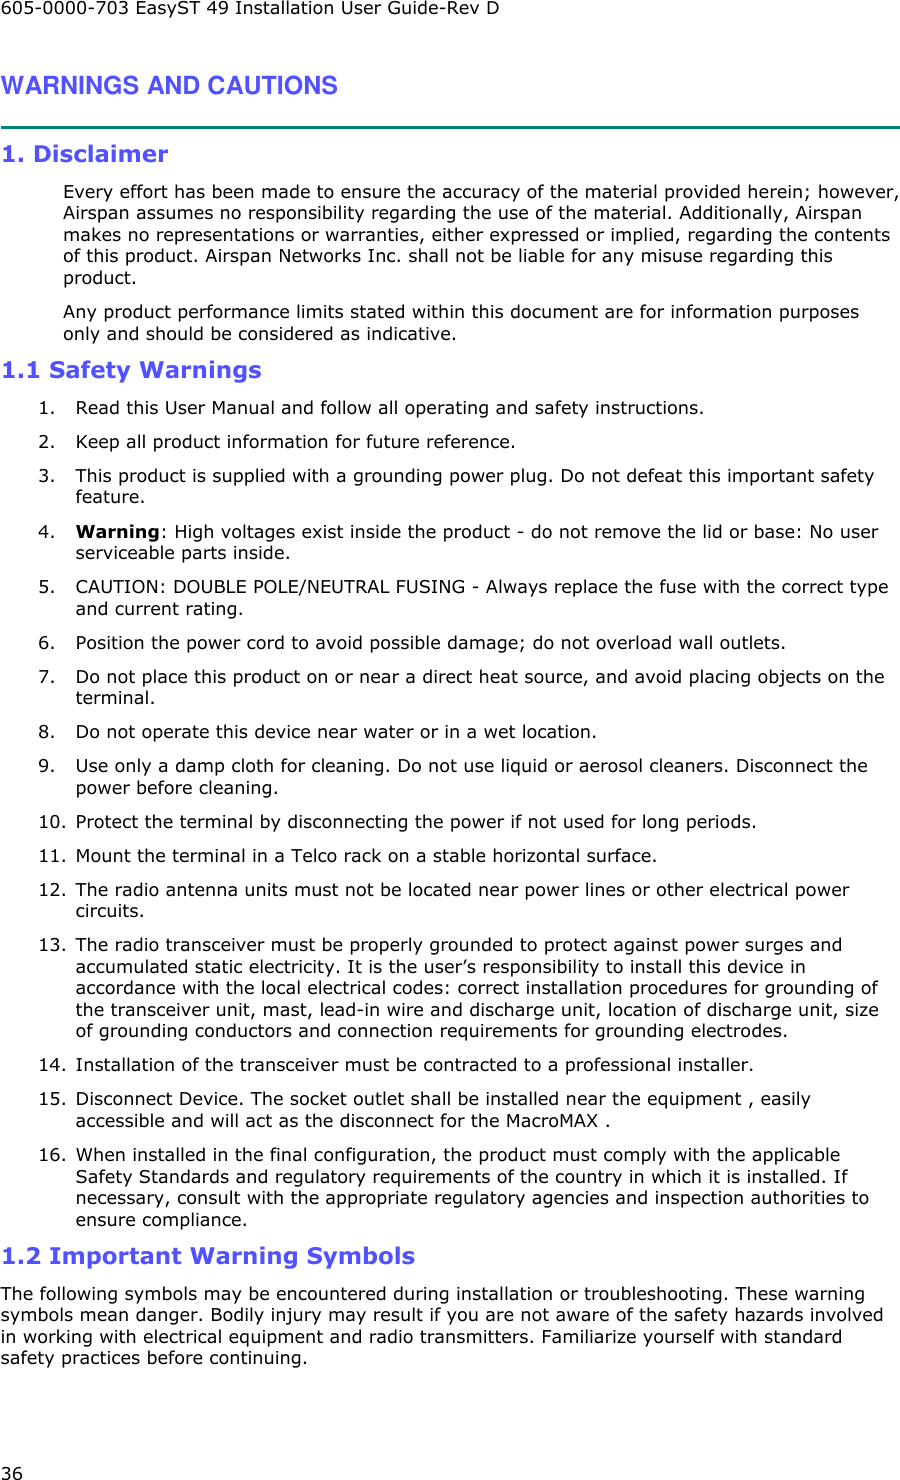 605-0000-703 EasyST 49 Installation User Guide-Rev D 36 WARNINGS AND CAUTIONS  1. Disclaimer Every effort has been made to ensure the accuracy of the material provided herein; however, Airspan assumes no responsibility regarding the use of the material. Additionally, Airspan makes no representations or warranties, either expressed or implied, regarding the contents of this product. Airspan Networks Inc. shall not be liable for any misuse regarding this product. Any product performance limits stated within this document are for information purposes only and should be considered as indicative. 1.1 Safety Warnings 1.  Read this User Manual and follow all operating and safety instructions. 2.  Keep all product information for future reference. 3.  This product is supplied with a grounding power plug. Do not defeat this important safety feature. 4.  Warning: High voltages exist inside the product - do not remove the lid or base: No user serviceable parts inside. 5.  CAUTION: DOUBLE POLE/NEUTRAL FUSING - Always replace the fuse with the correct type and current rating. 6.  Position the power cord to avoid possible damage; do not overload wall outlets. 7.  Do not place this product on or near a direct heat source, and avoid placing objects on the terminal. 8.  Do not operate this device near water or in a wet location. 9.  Use only a damp cloth for cleaning. Do not use liquid or aerosol cleaners. Disconnect the power before cleaning. 10.  Protect the terminal by disconnecting the power if not used for long periods. 11.  Mount the terminal in a Telco rack on a stable horizontal surface. 12.  The radio antenna units must not be located near power lines or other electrical power circuits. 13.  The radio transceiver must be properly grounded to protect against power surges and accumulated static electricity. It is the user’s responsibility to install this device in accordance with the local electrical codes: correct installation procedures for grounding of the transceiver unit, mast, lead-in wire and discharge unit, location of discharge unit, size of grounding conductors and connection requirements for grounding electrodes.  14.  Installation of the transceiver must be contracted to a professional installer.  15.  Disconnect Device. The socket outlet shall be installed near the equipment , easily accessible and will act as the disconnect for the MacroMAX . 16.  When installed in the final configuration, the product must comply with the applicable Safety Standards and regulatory requirements of the country in which it is installed. If necessary, consult with the appropriate regulatory agencies and inspection authorities to ensure compliance. 1.2 Important Warning Symbols The following symbols may be encountered during installation or troubleshooting. These warning symbols mean danger. Bodily injury may result if you are not aware of the safety hazards involved in working with electrical equipment and radio transmitters. Familiarize yourself with standard safety practices before continuing.     